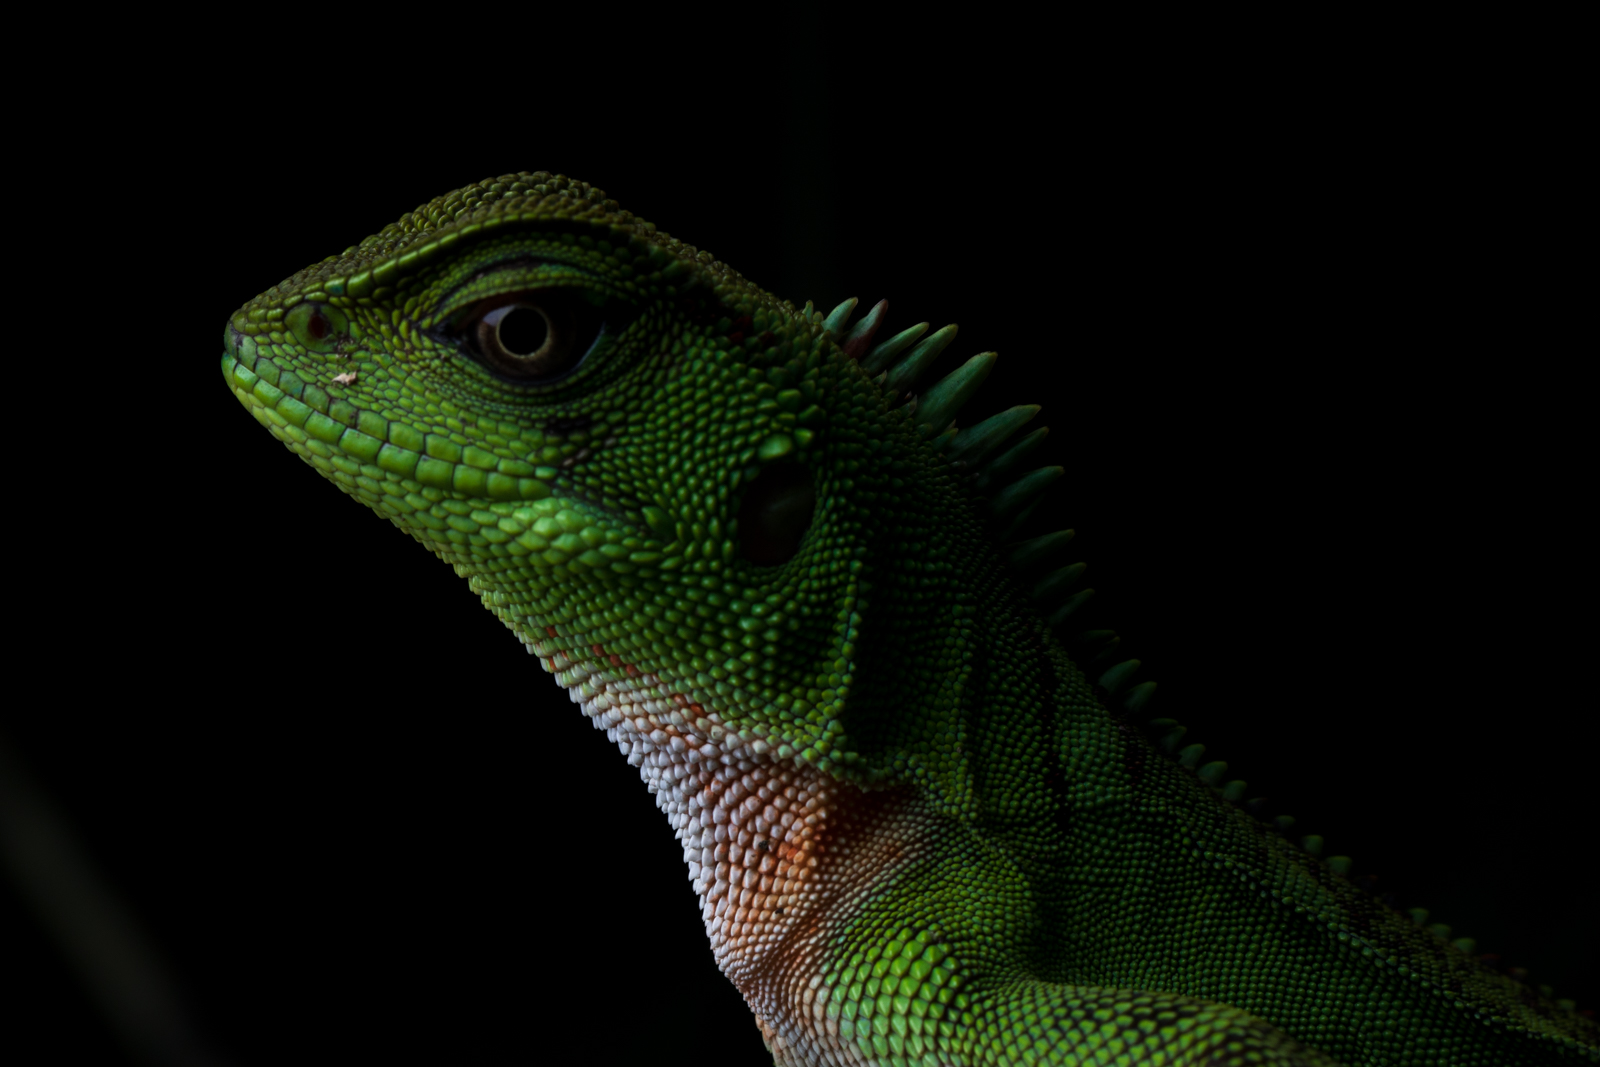 Close-up picture of an Amazon Dwarf-Iguana (Enyalioides laticeps)